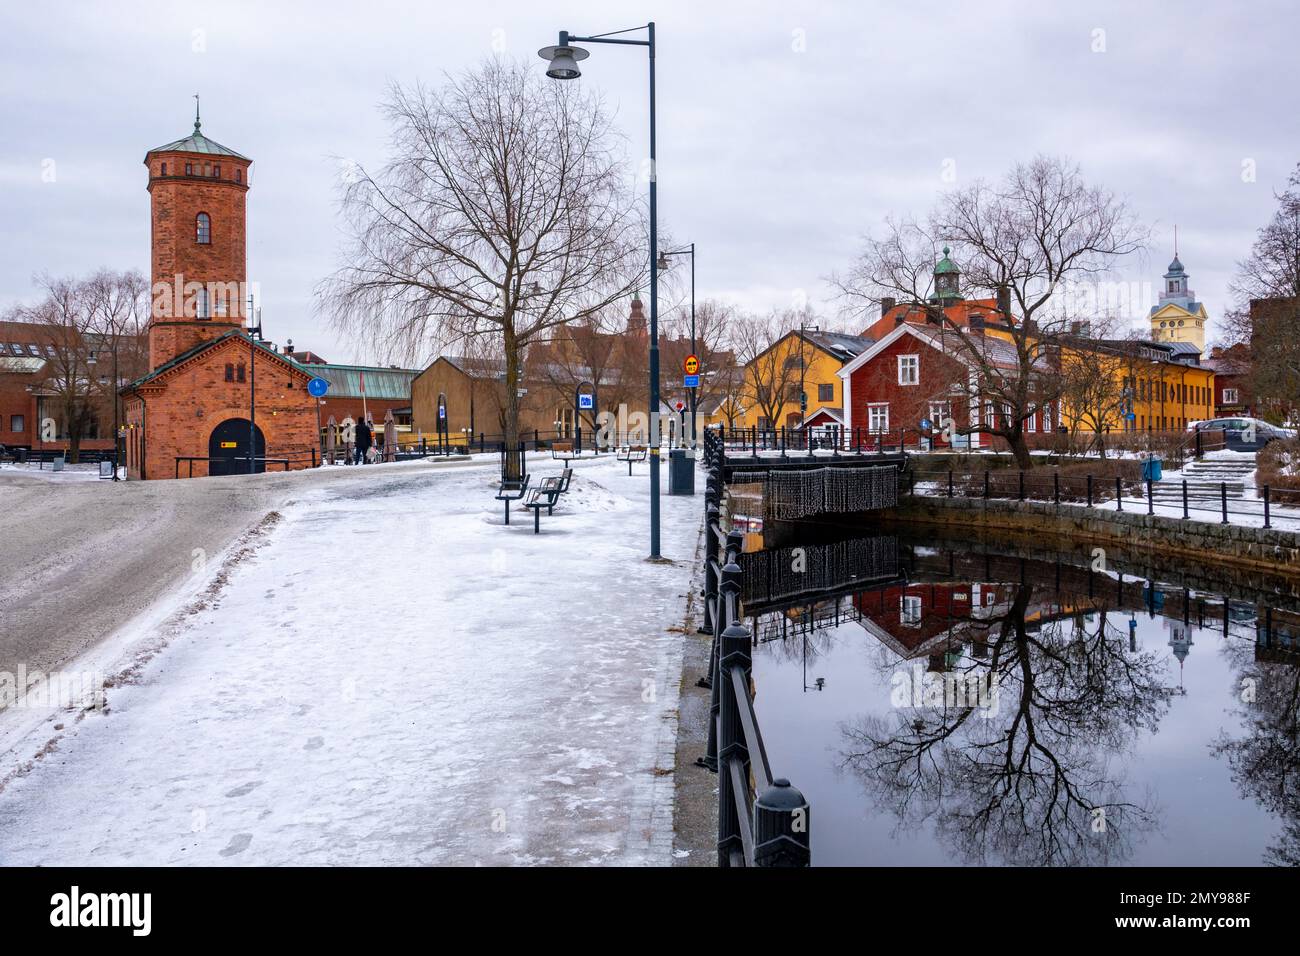 Old tow of Falun with traditional, picturesque, red wooden houses in the city of Falun in Dalarna, Sweded Stock Photo